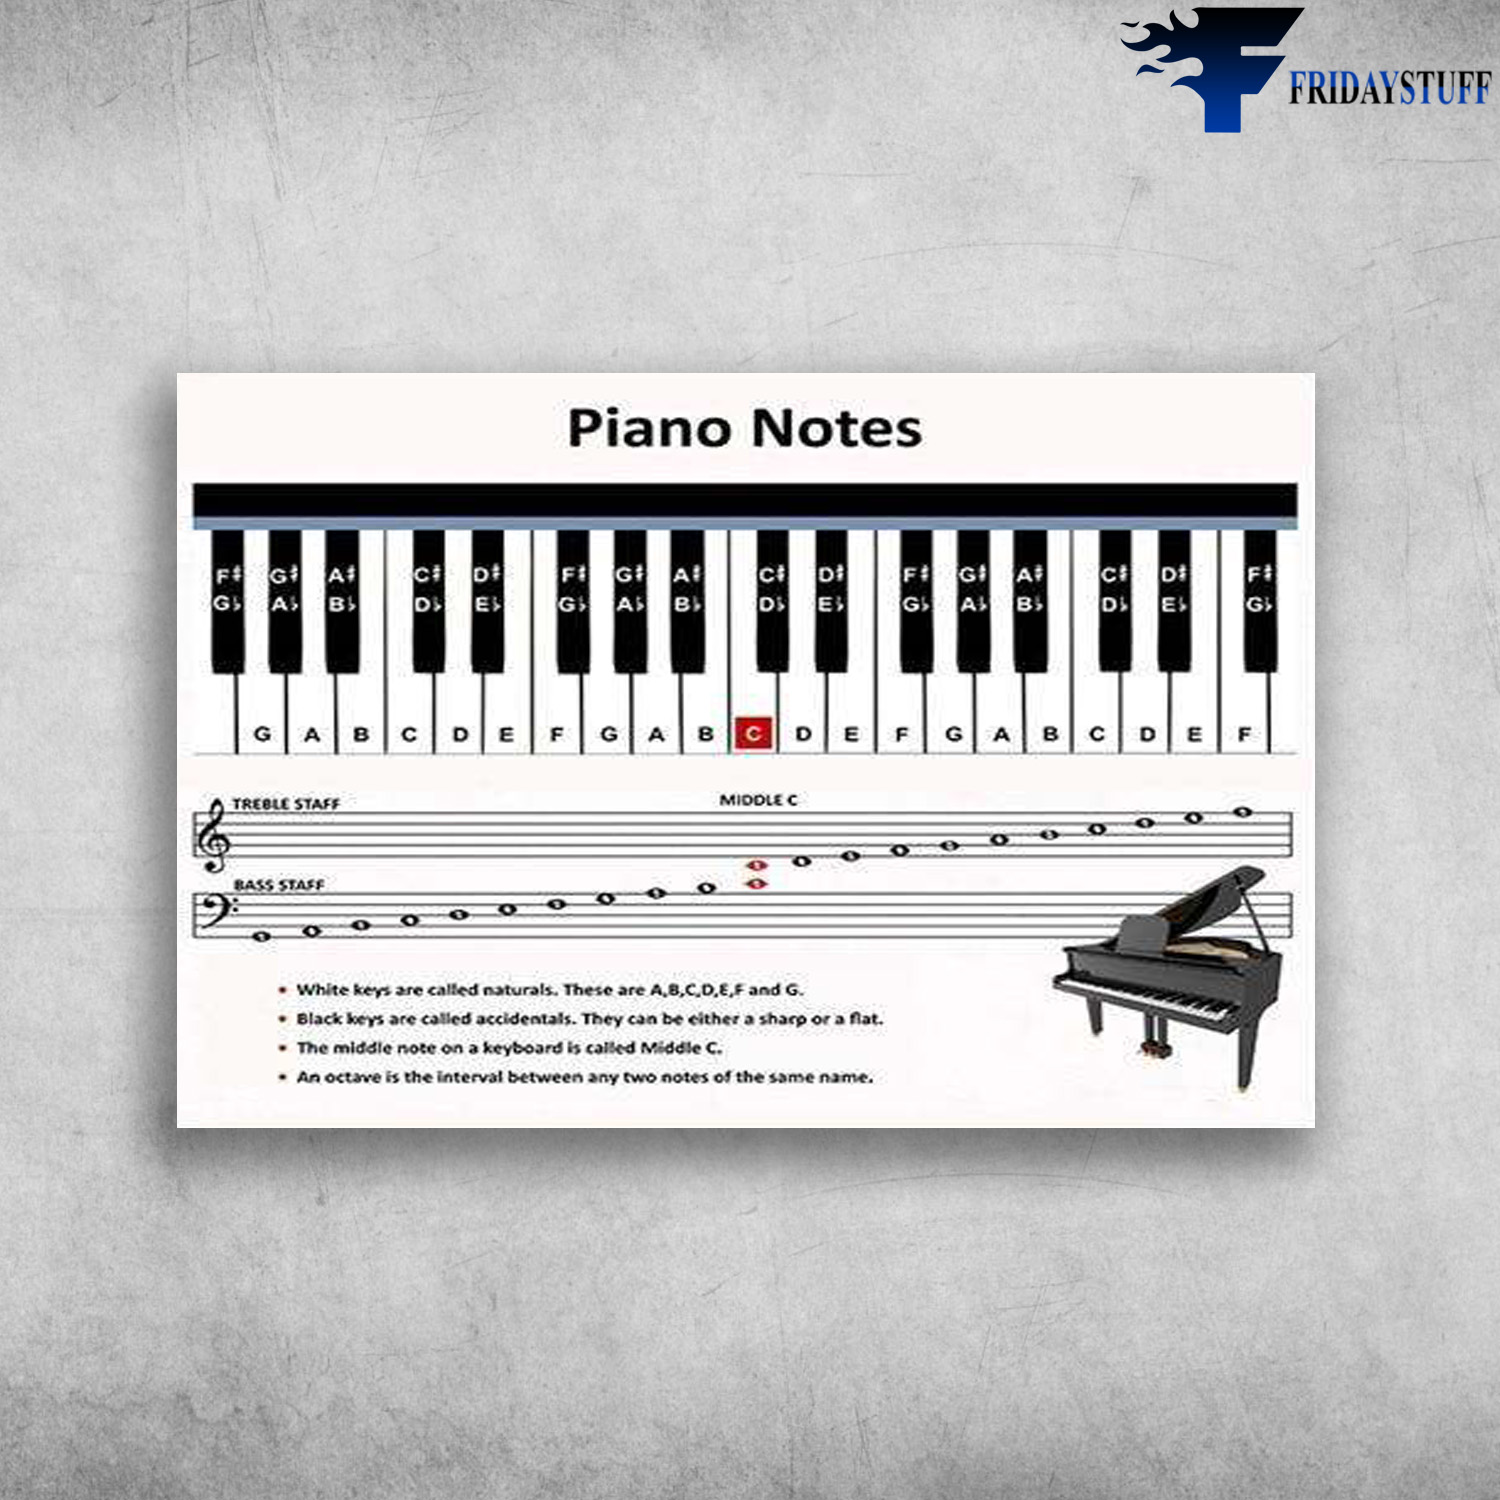 Piano Notes - Treble Staff, Bass Staff, Piano Key, Piano Knowledge, White Keys Are Called Naturals, Black Keys Are Called Accidentals, They Can Be Either A Sharp Or A Flat